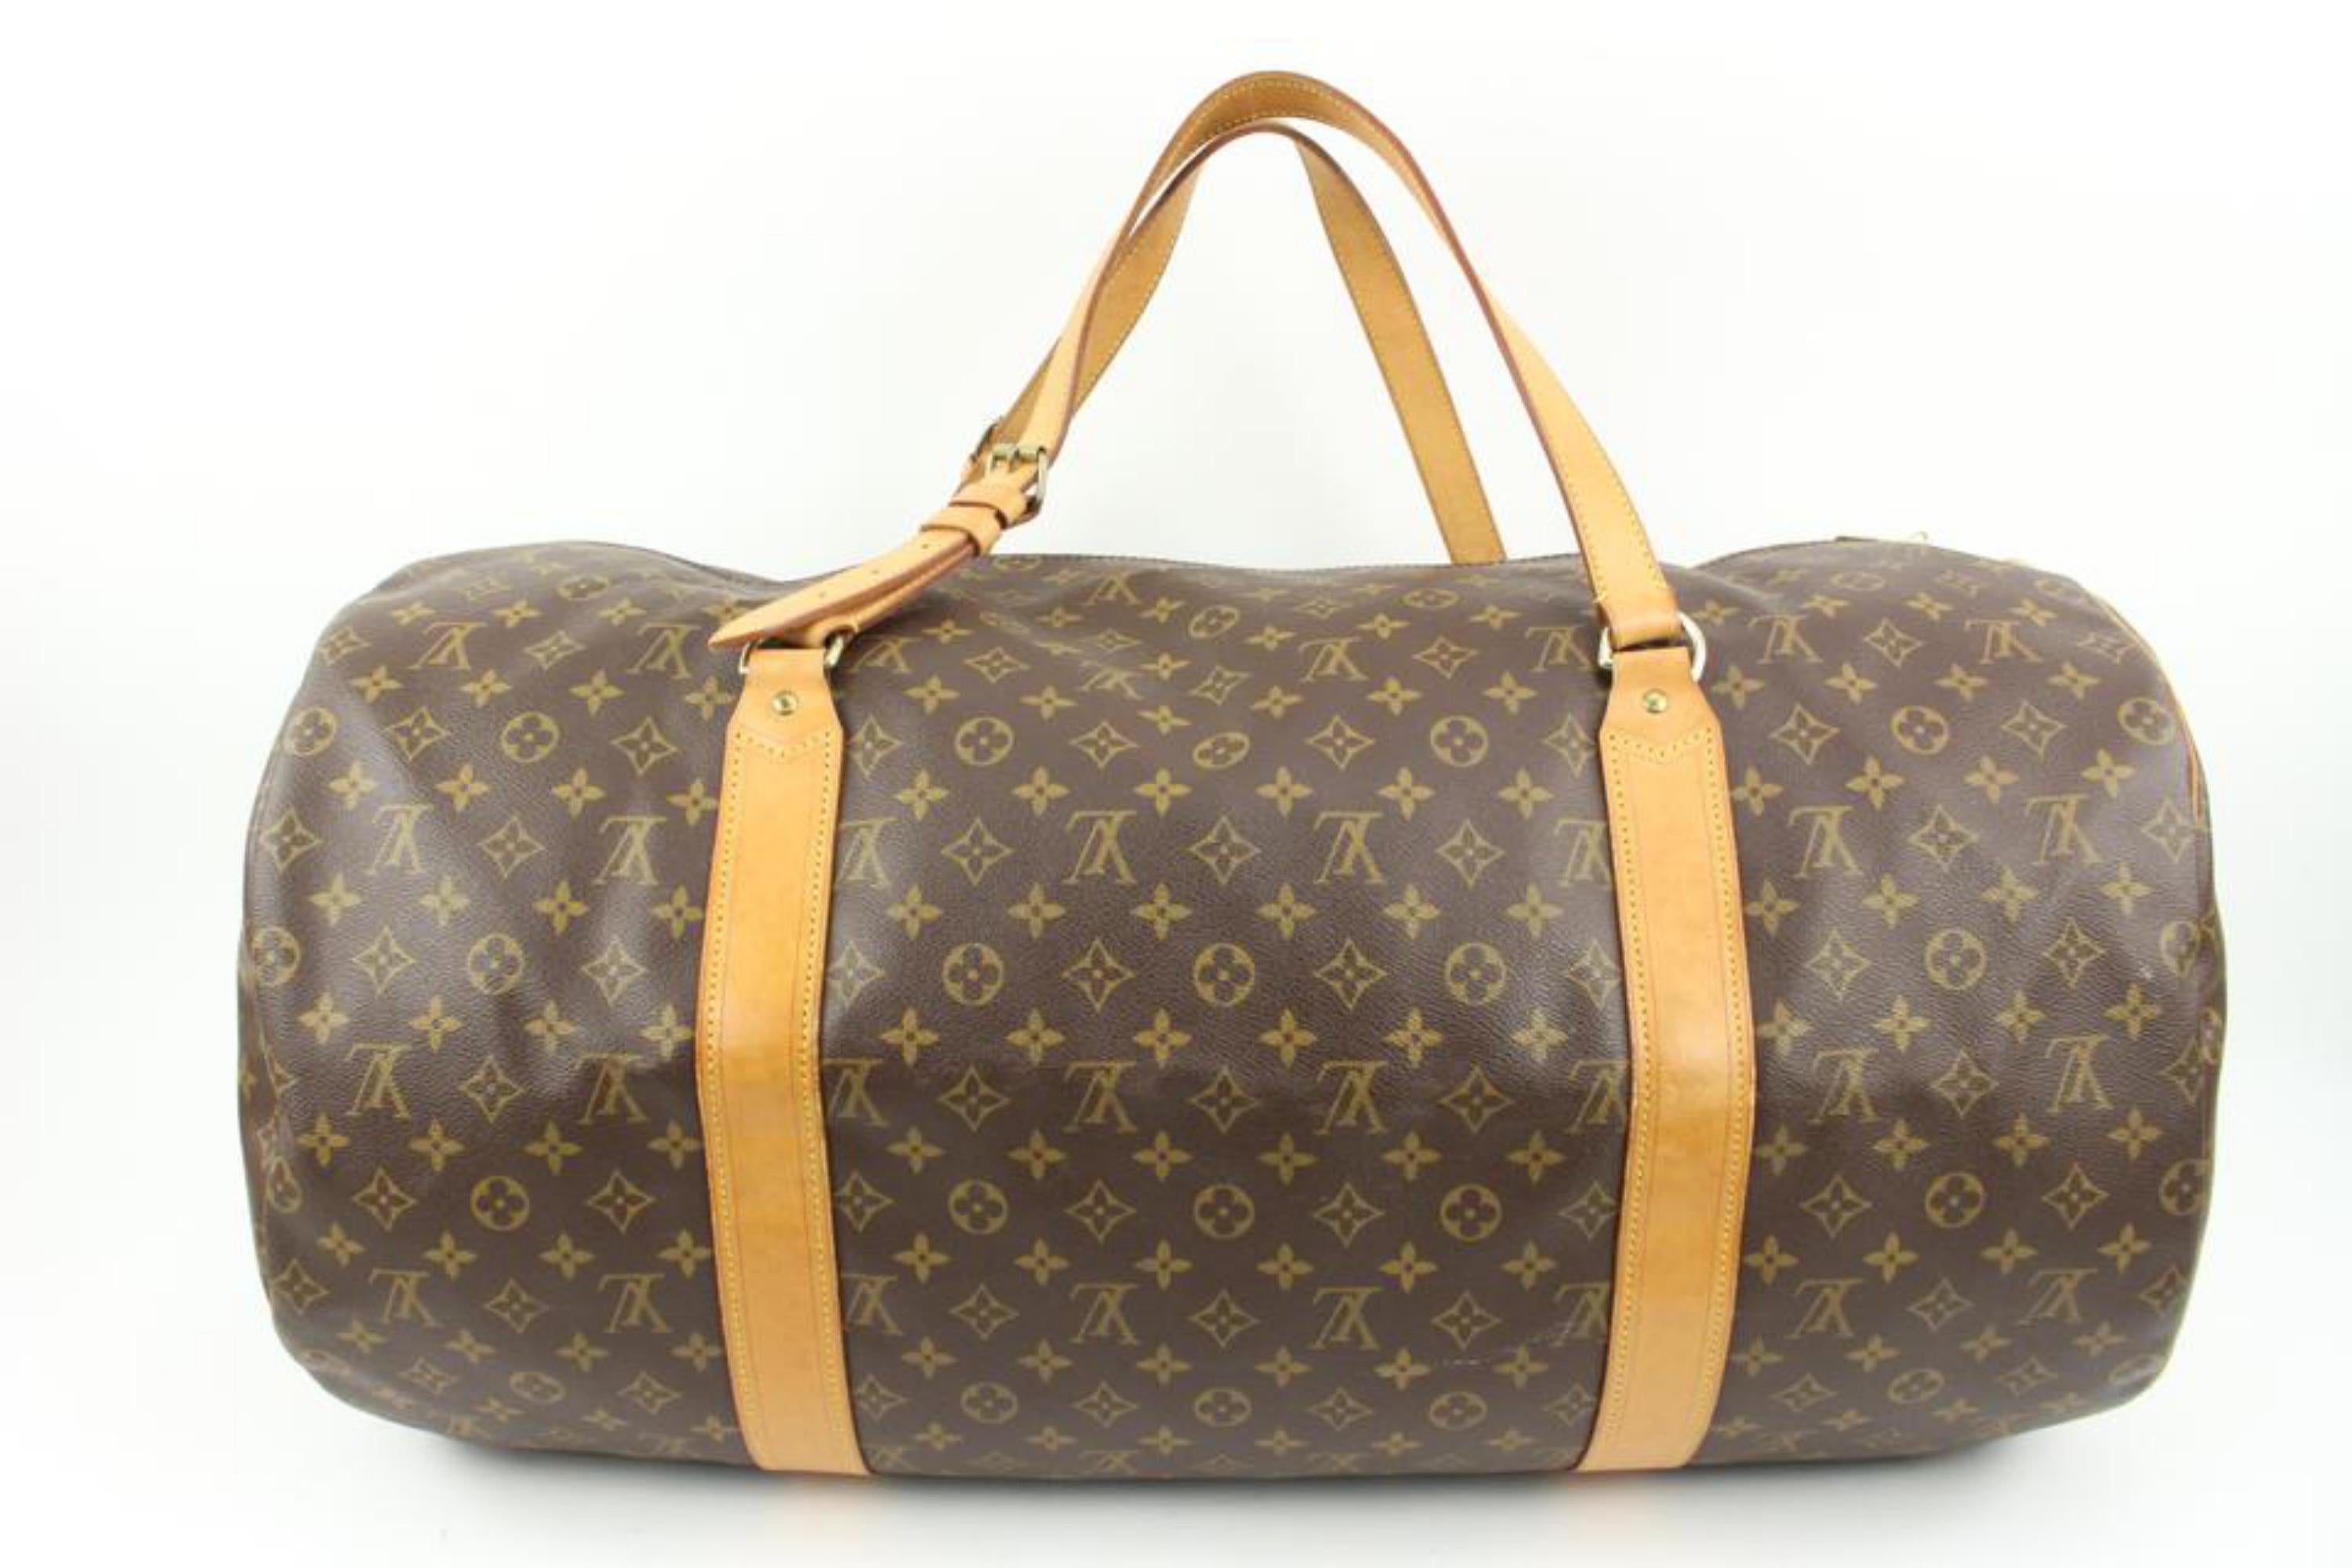 Gray Louis Vuitton Discontinued Monogram Sac Polochon 70 Keepall Bandouliere 125lv36  For Sale